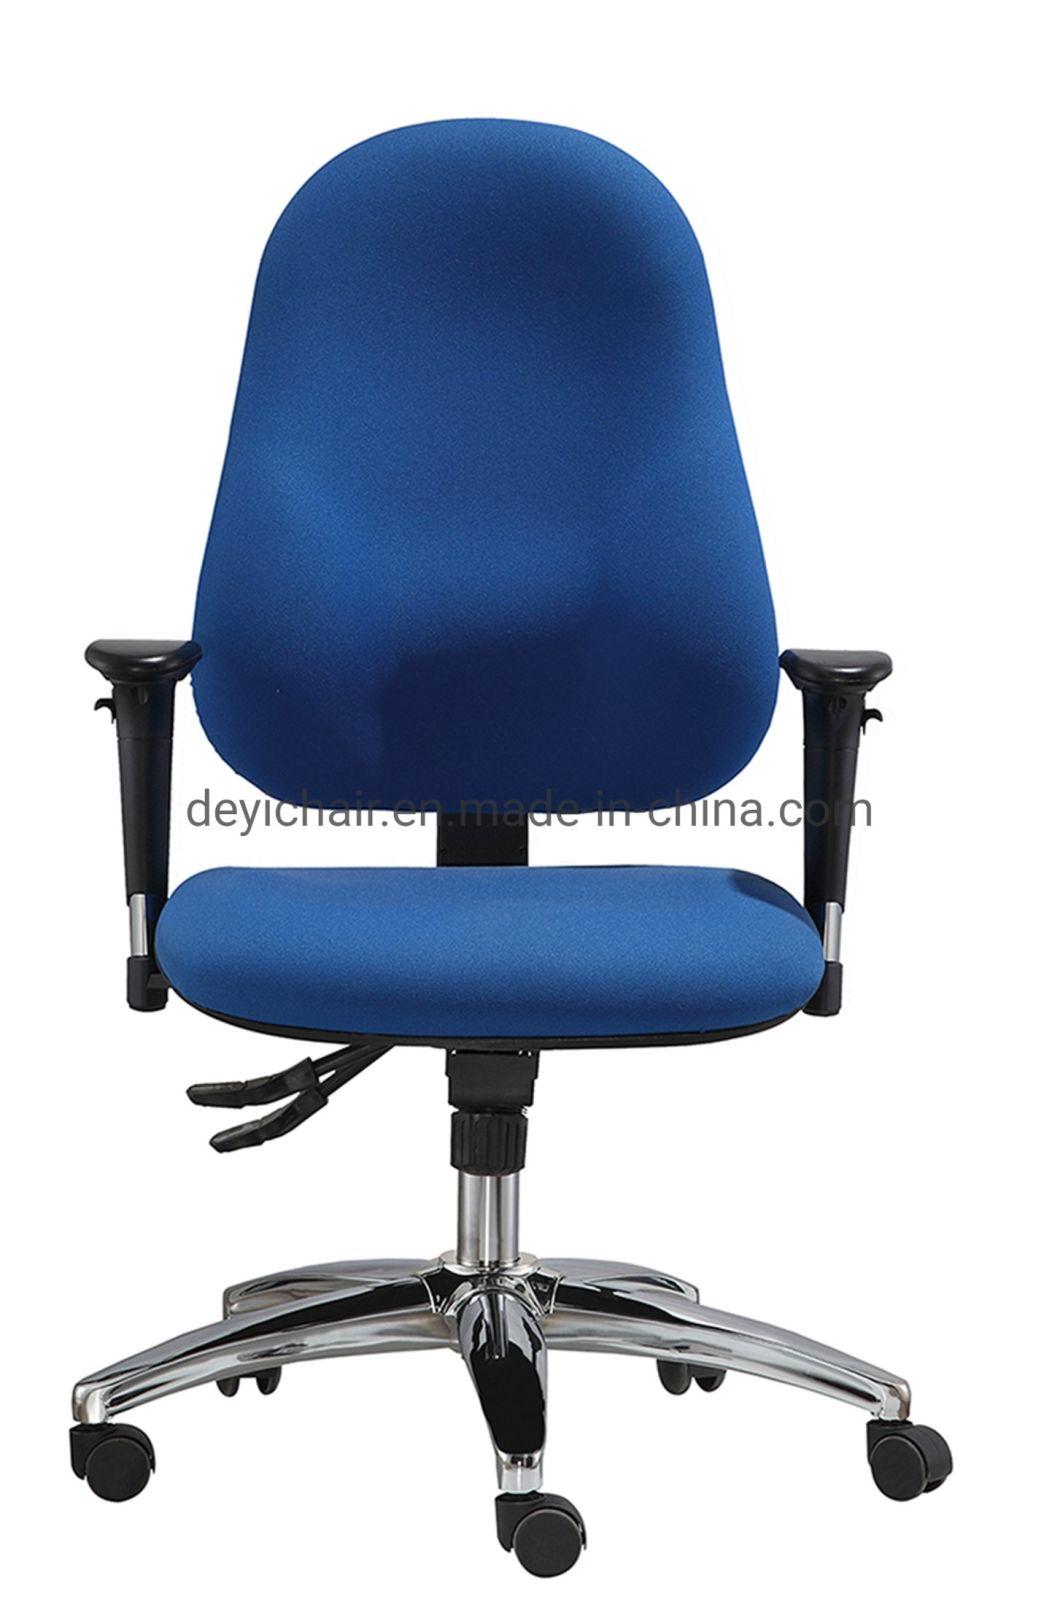 Ratchet Back Two Lever Functional Mechanism Nylon Caster Fabric Back&Seat Executive Computer Office Chair